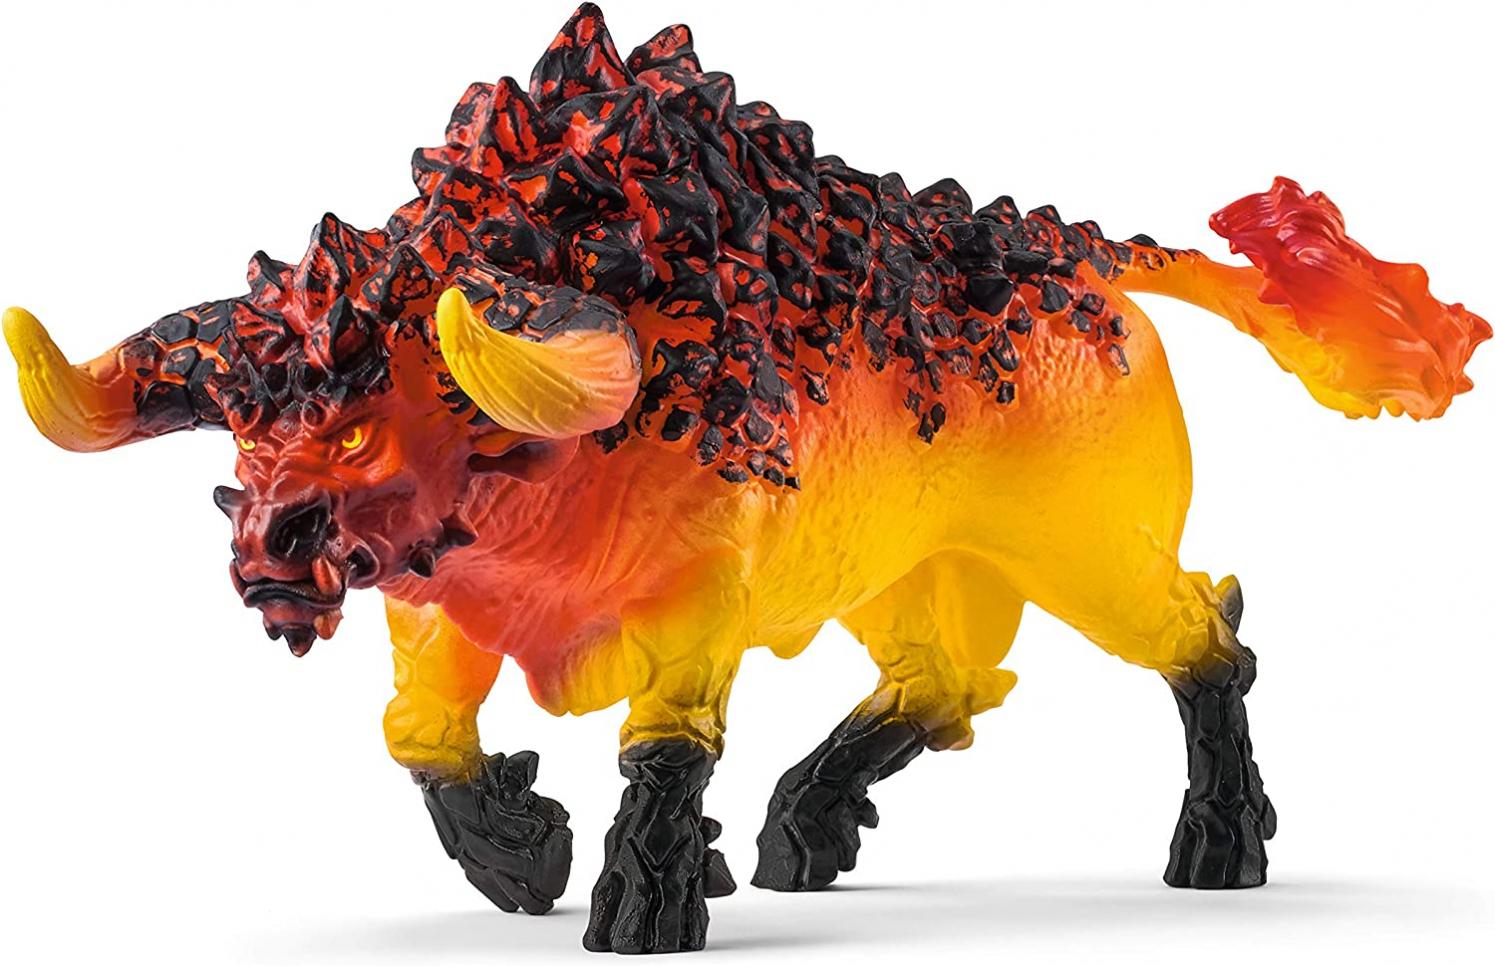 Schleich Eldrador, Eldrador Creatures, Action Figures for Boys and Girls 7-12 years old, Fire Bull